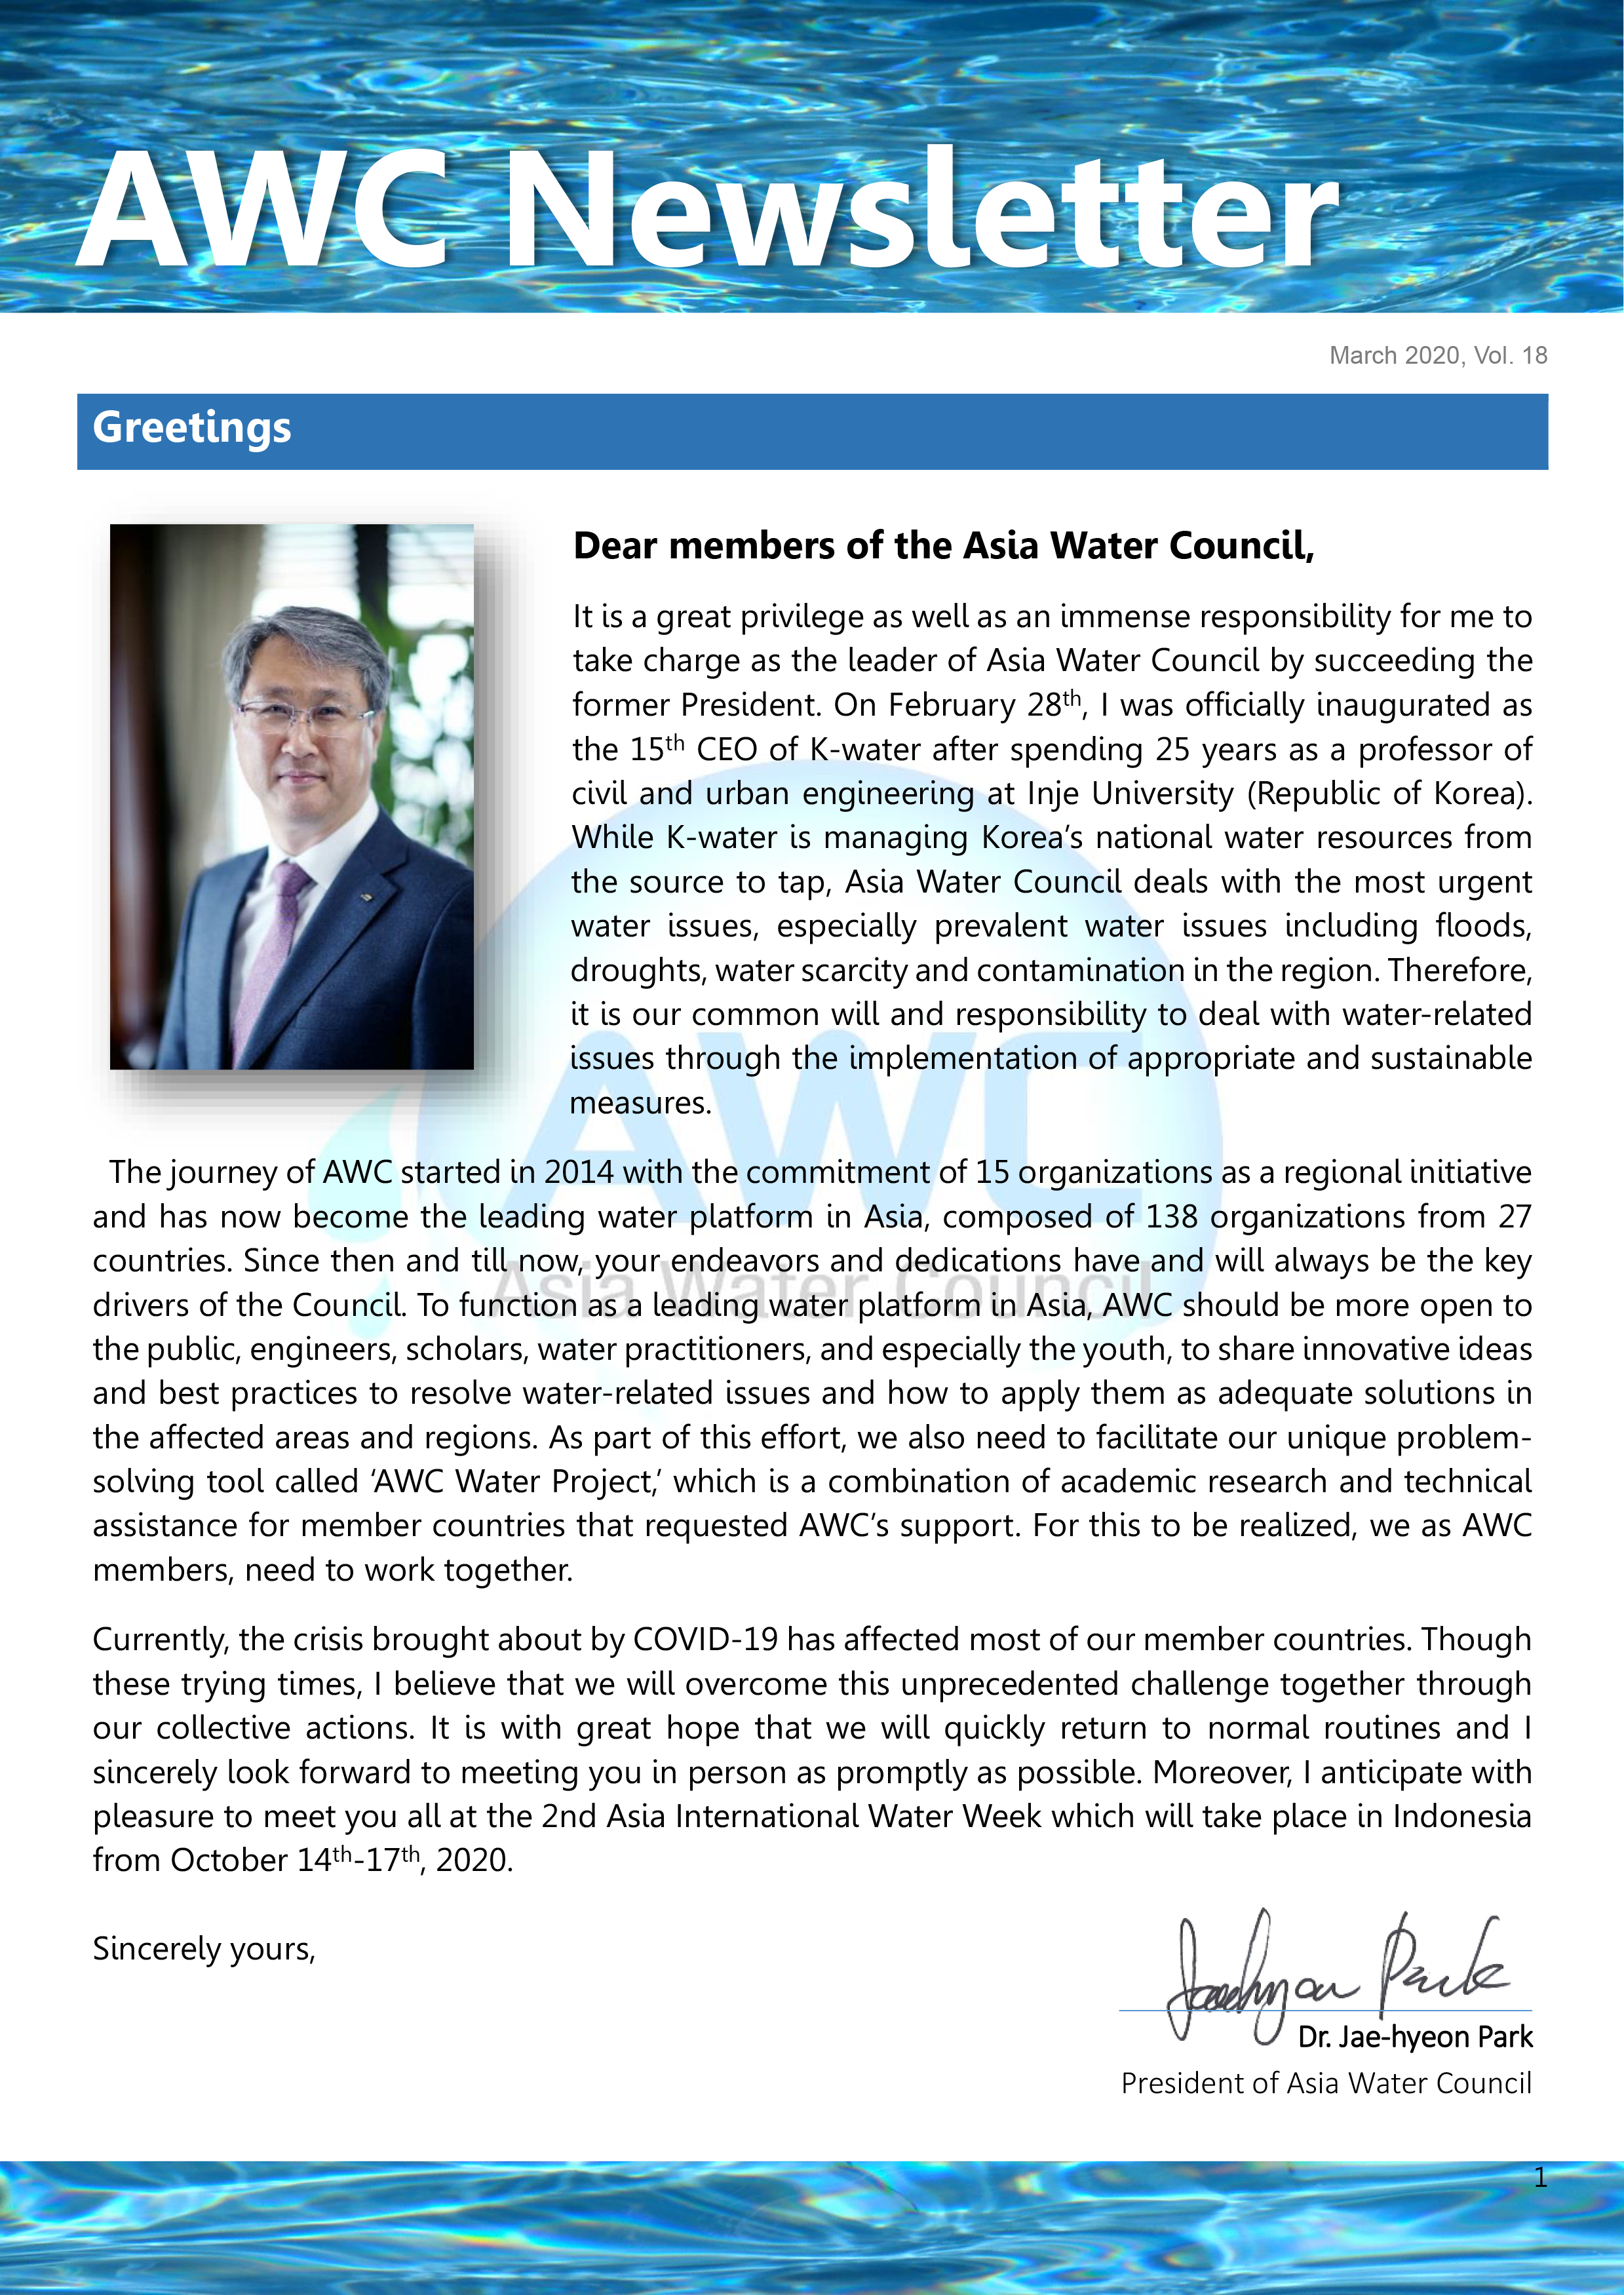 AWC Newsletter Vol.18.png